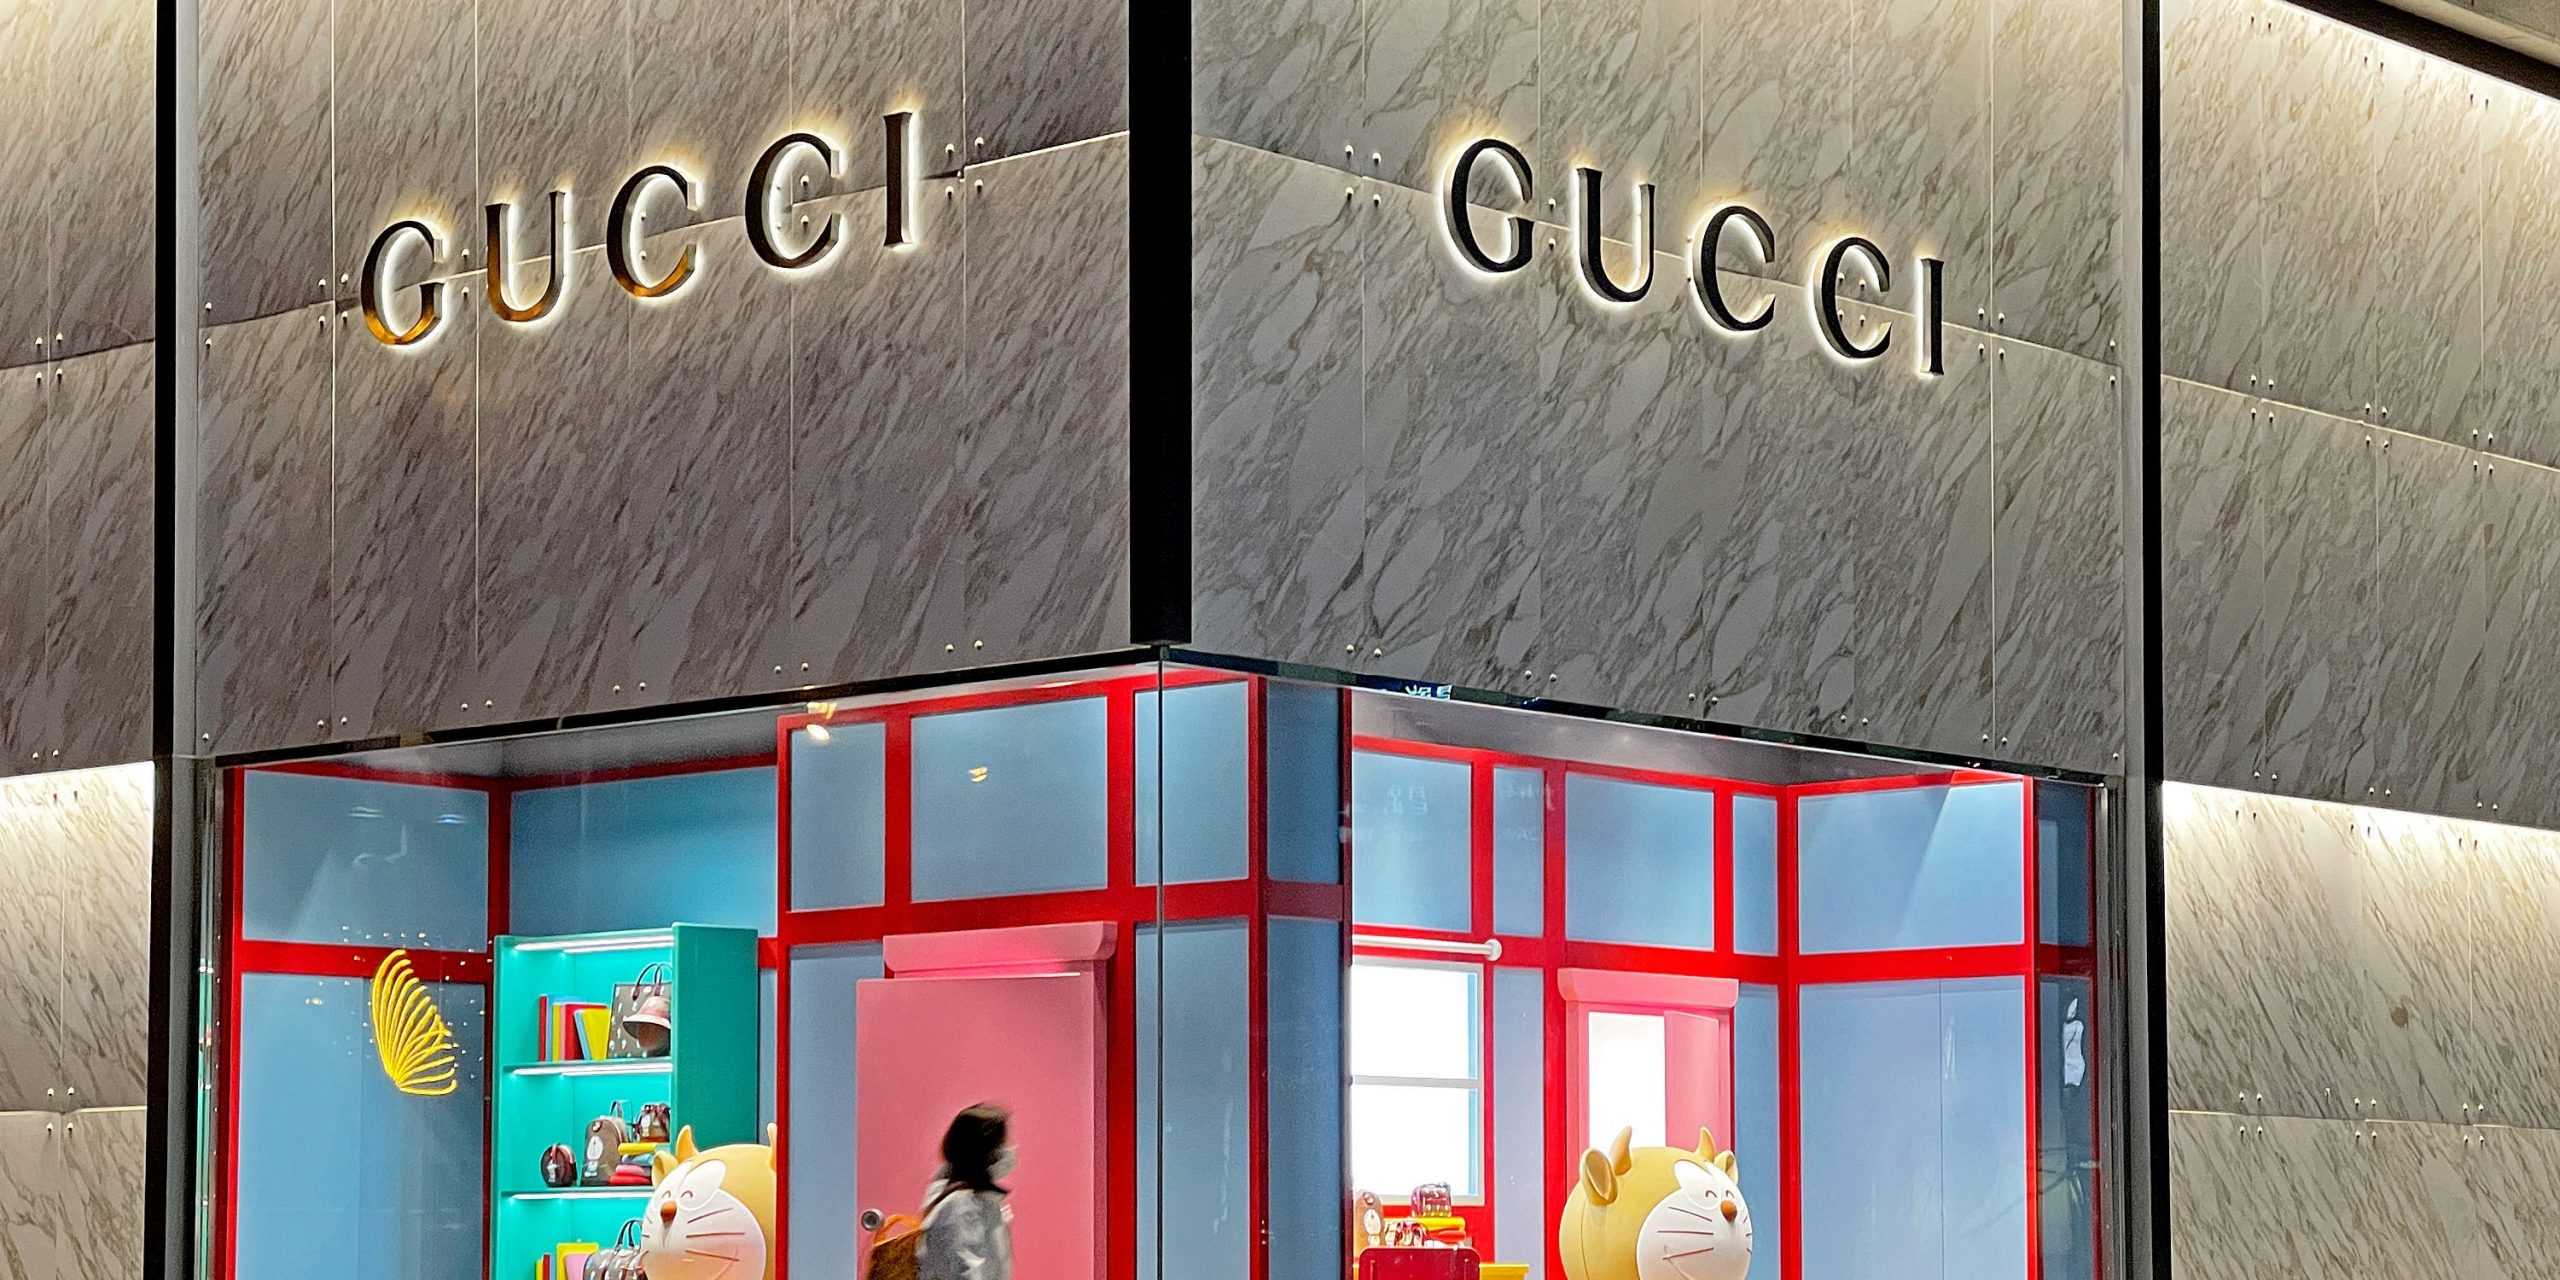 A pedestrian walks past Doraemon figures on display in the window of a Guccio Gucci SpA luxury goods store to mark the Chinese New Year, the Year of the Ox, on January 27, 2021 in Beijing, China.